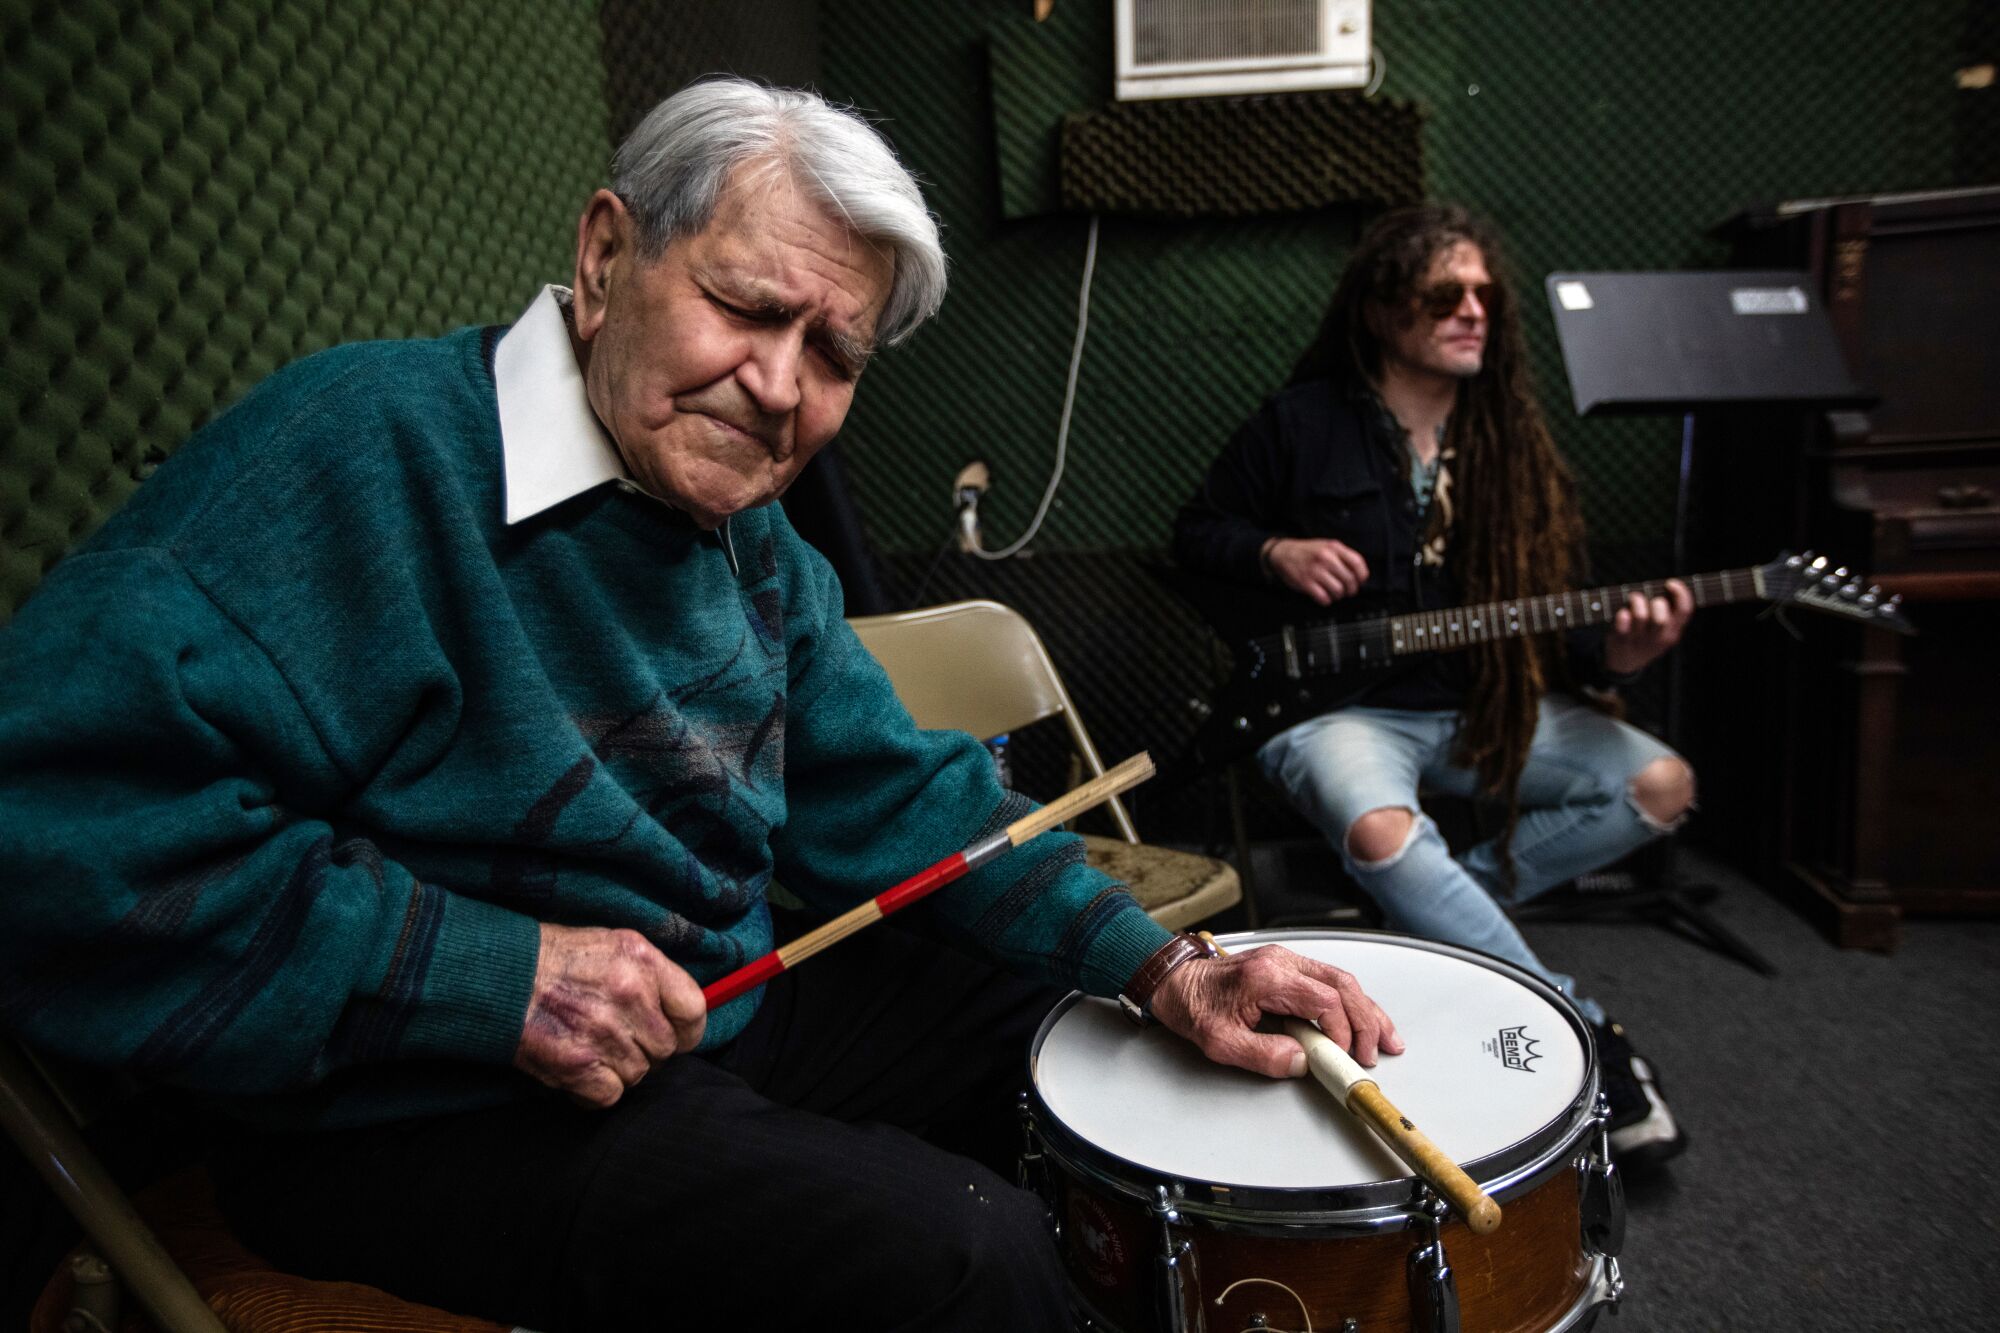 Jazz drummer Steve Hide, 91, left, is playing his drum in the studio with Leo Vaz, on guitar, right